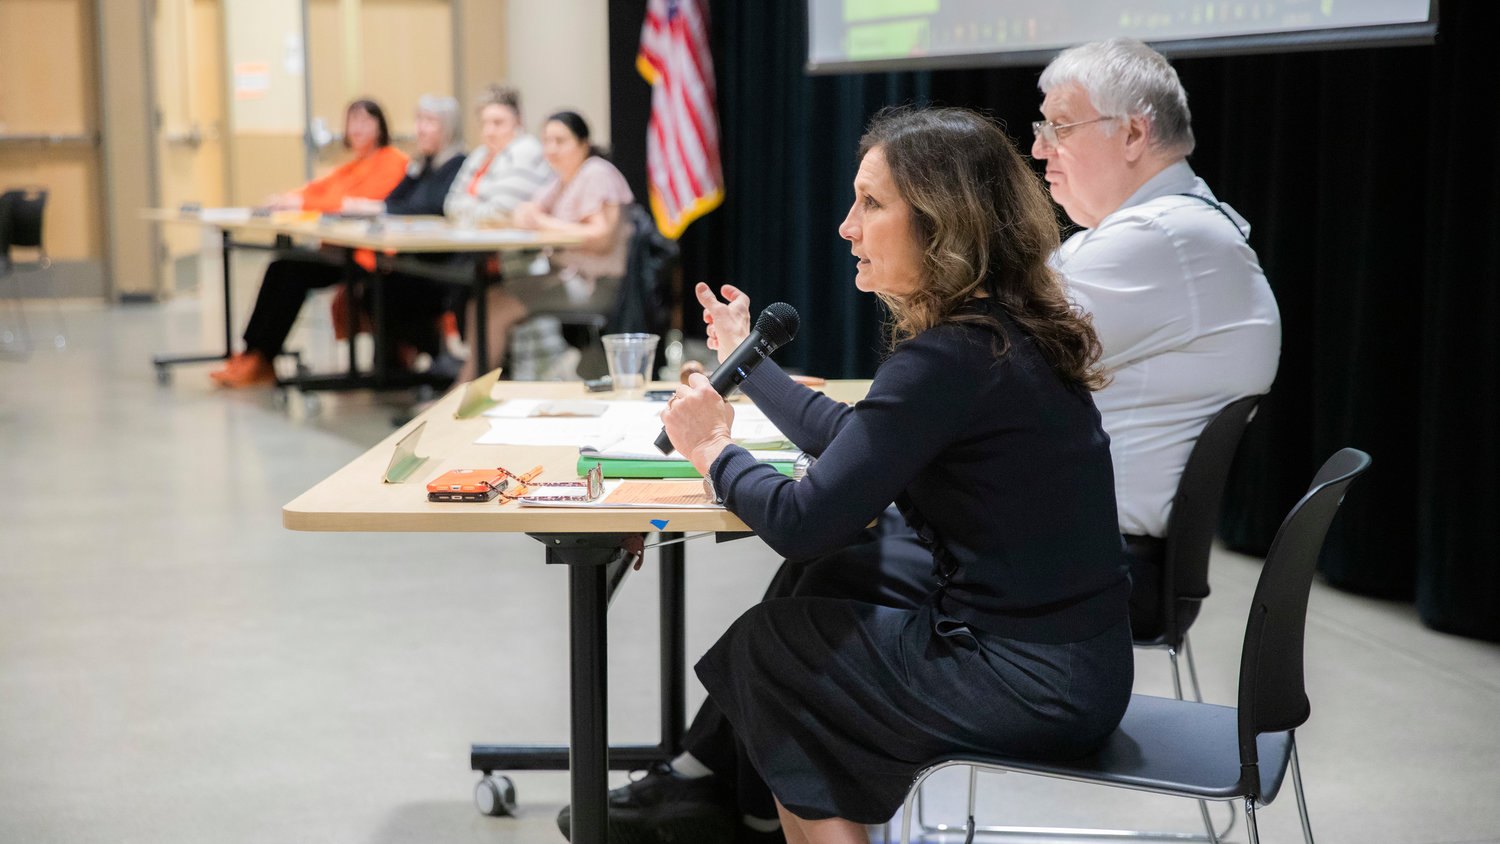 Centralia Superintendent Lisa Grant answers questions about the levy during a school board meeting Tuesday evening at Centralia High School.